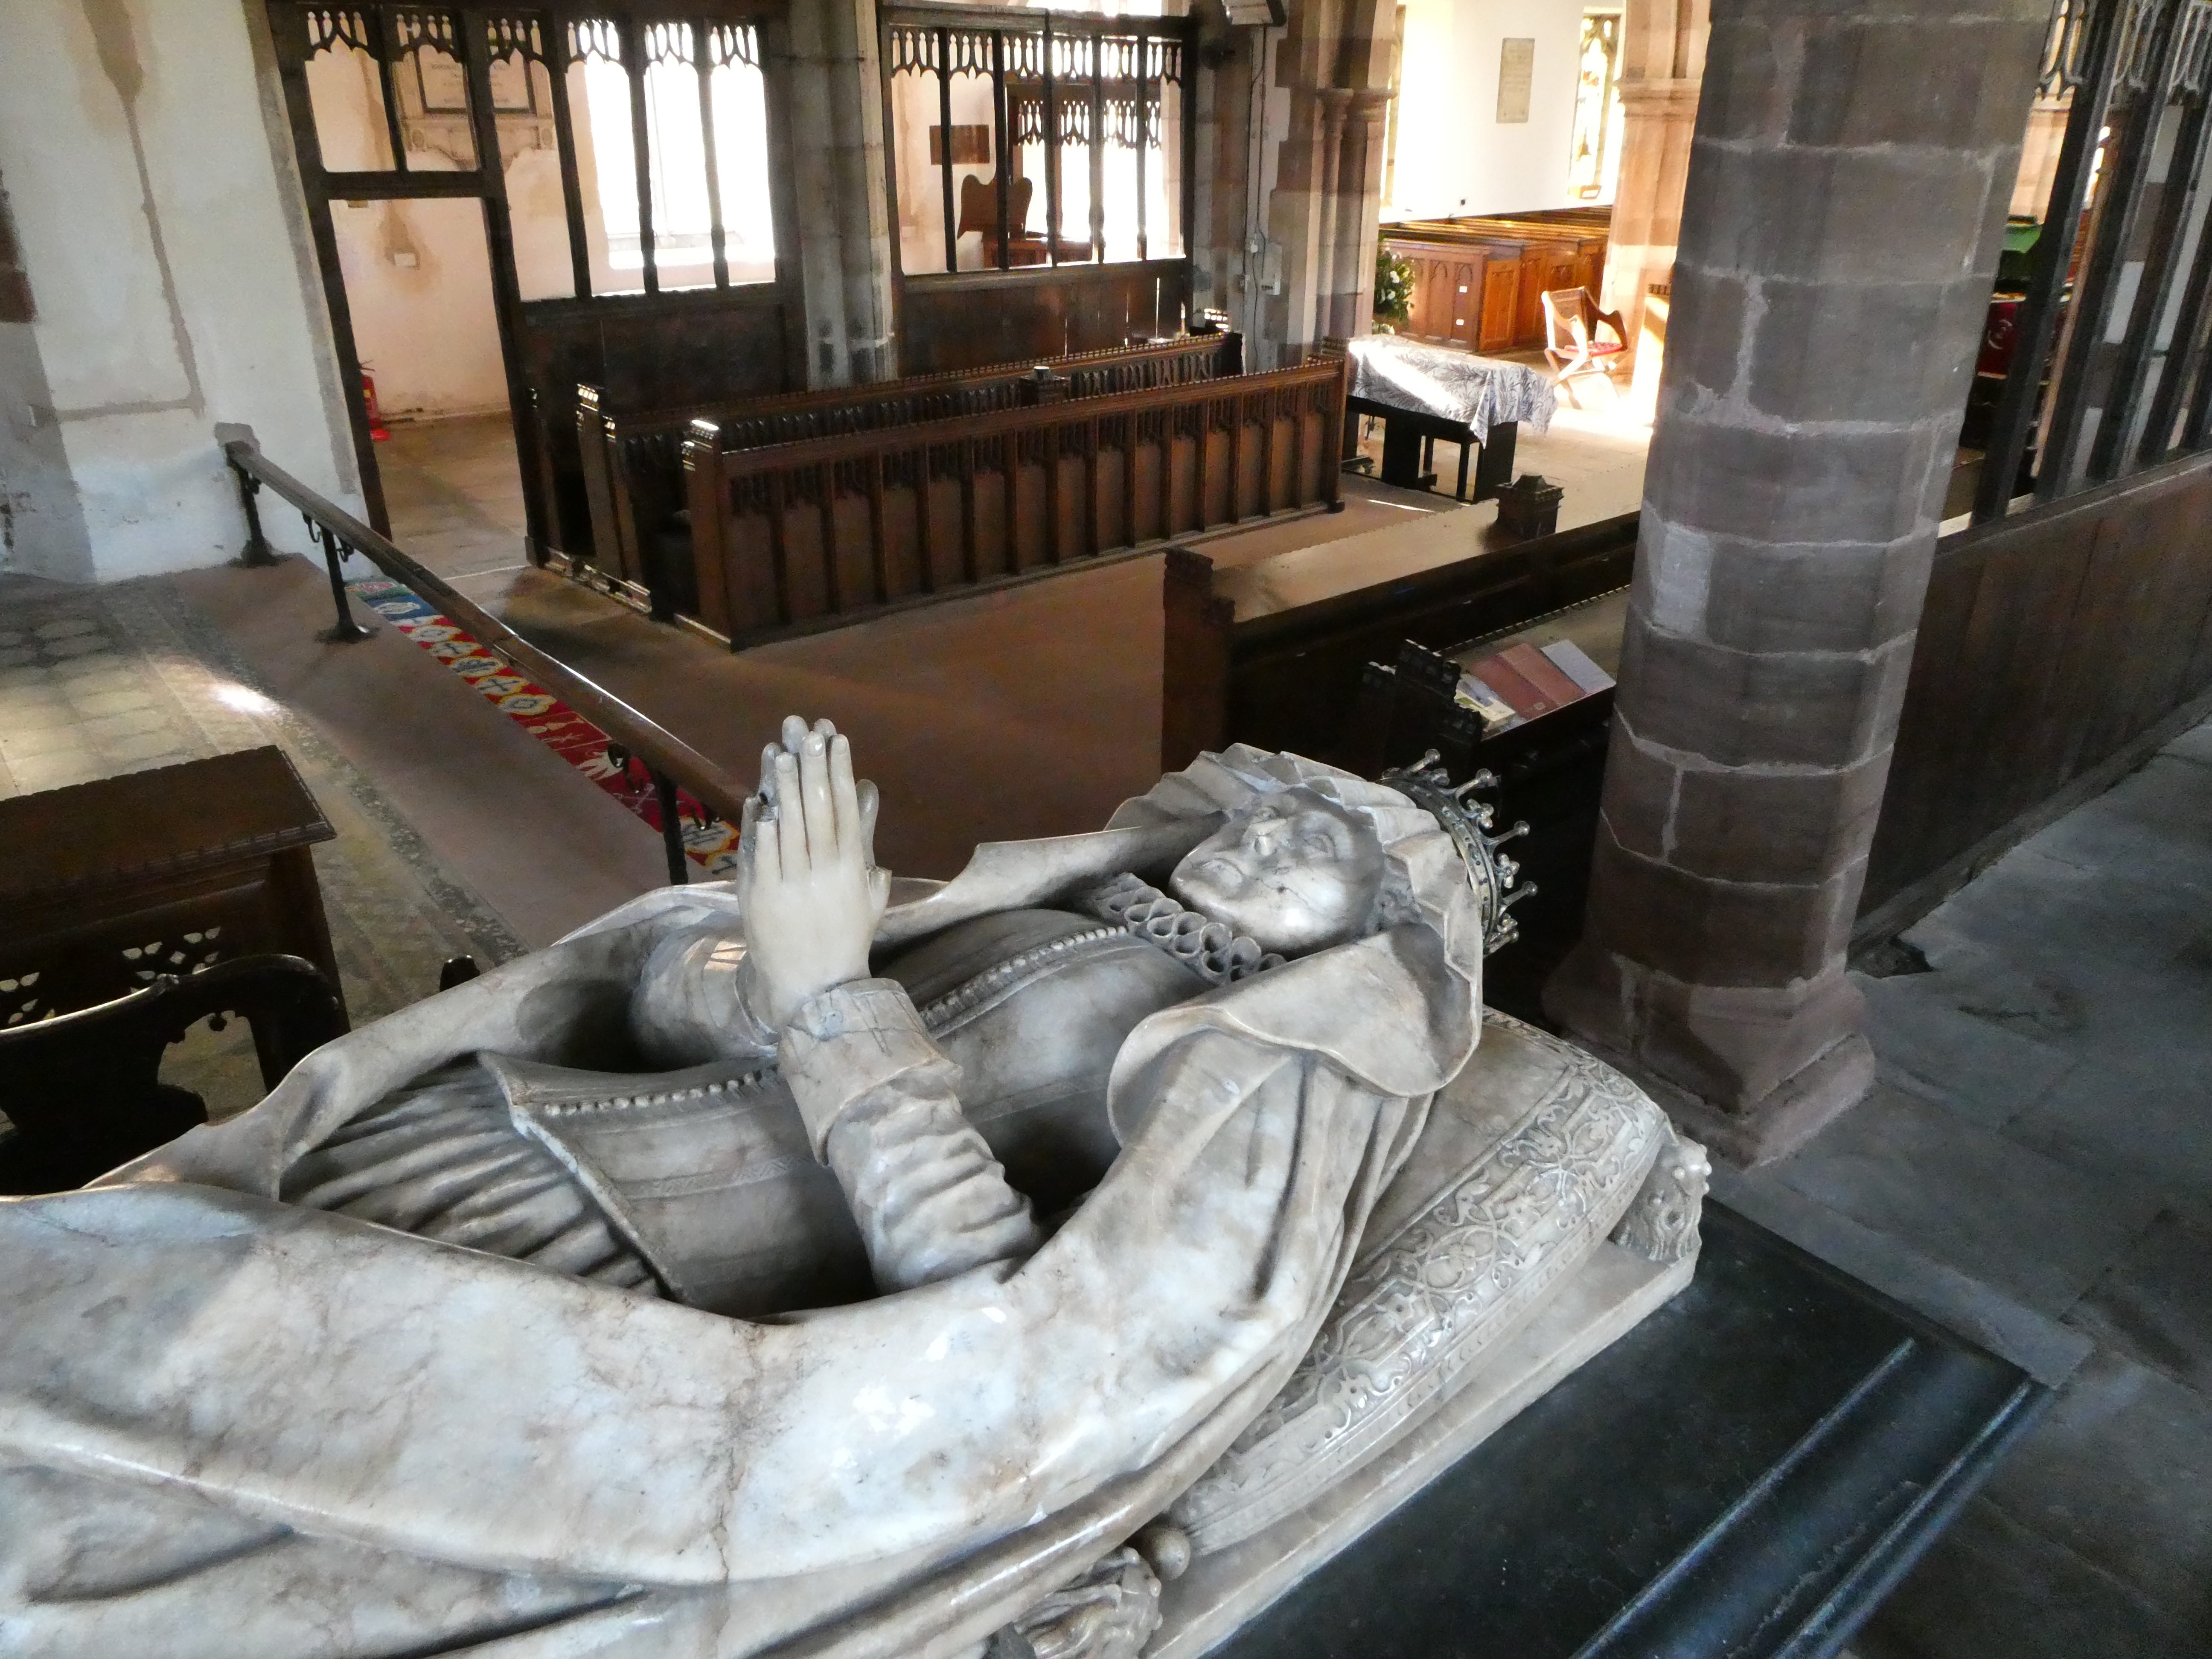 Tomb effigy of Margaret Clifford, Lady Anne's mother, in St Lawrence's Church, Appleby.